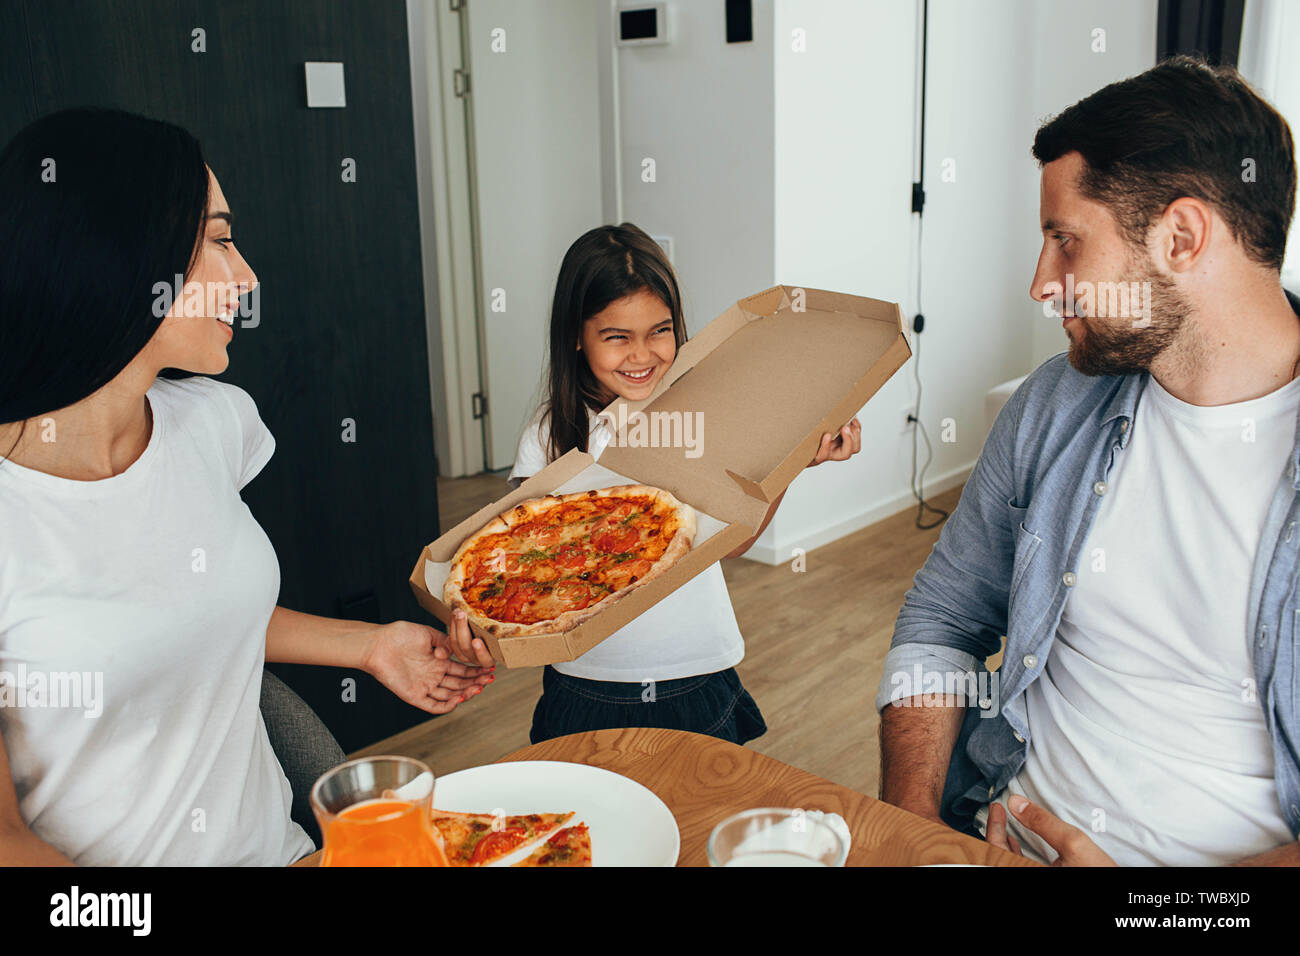 Family enjoying pizza lunch. Little girl having fun with her family Stock Photo